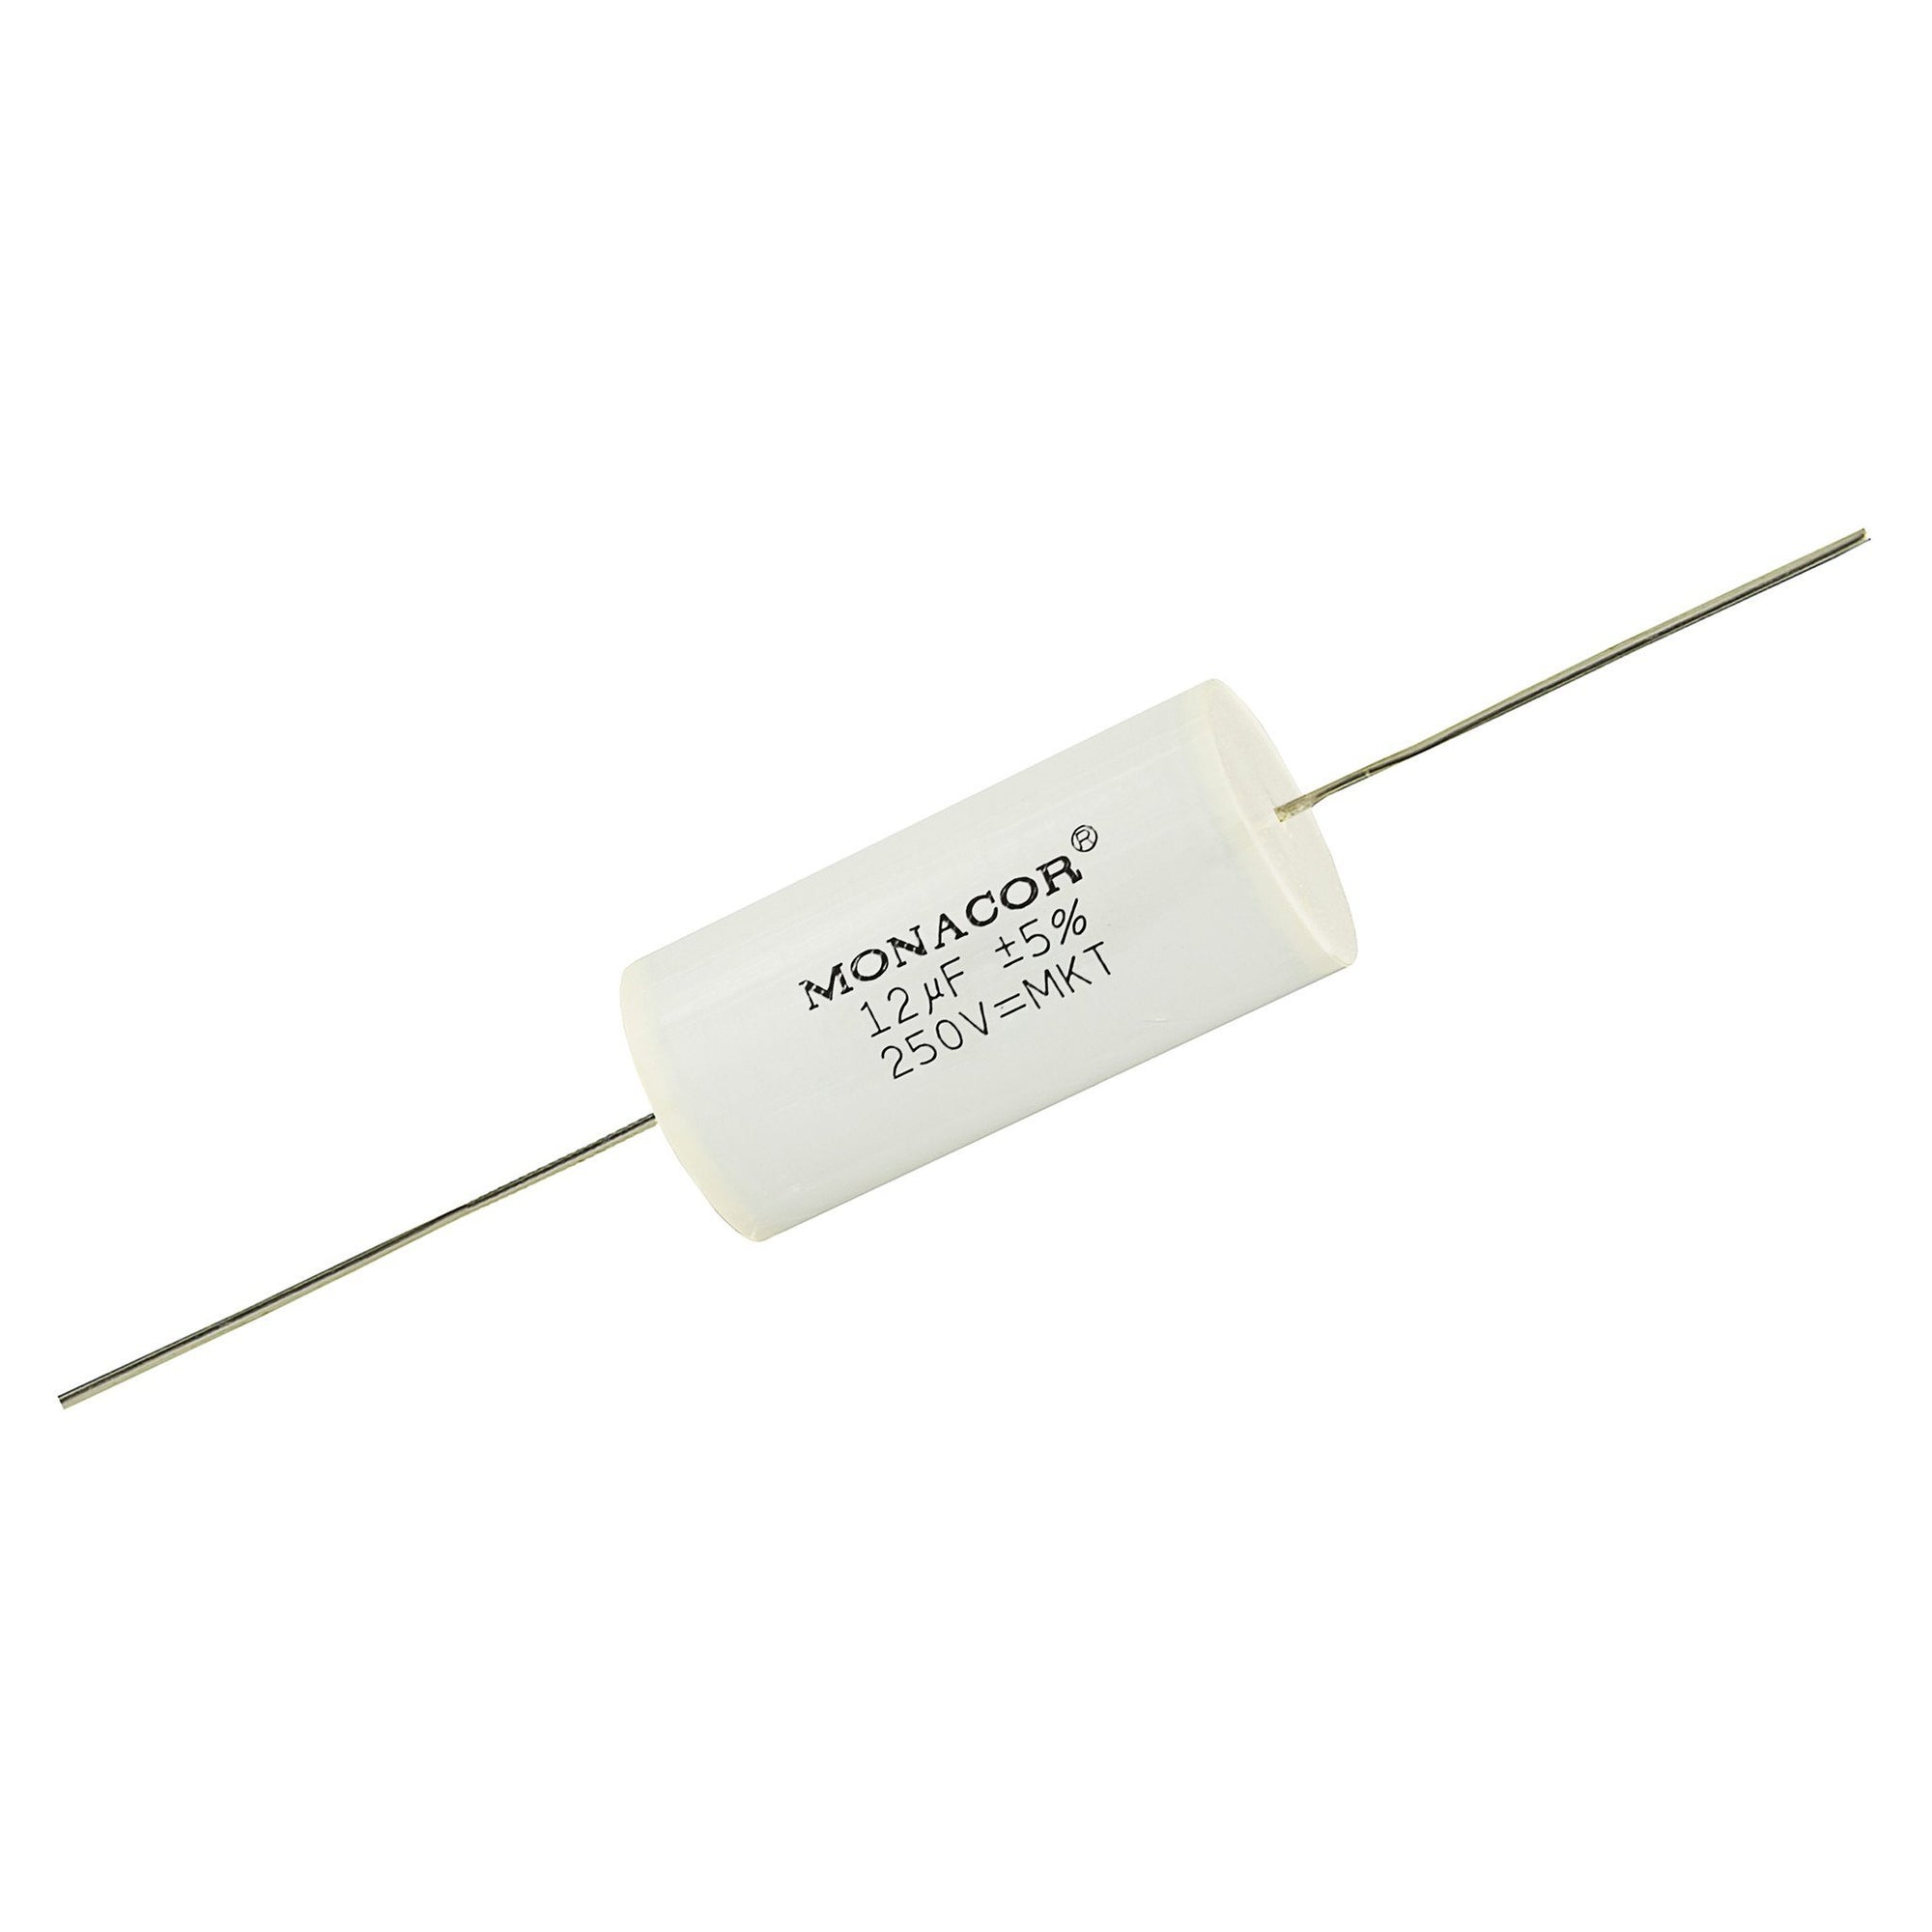 Capacitors - MKT Polyester Film